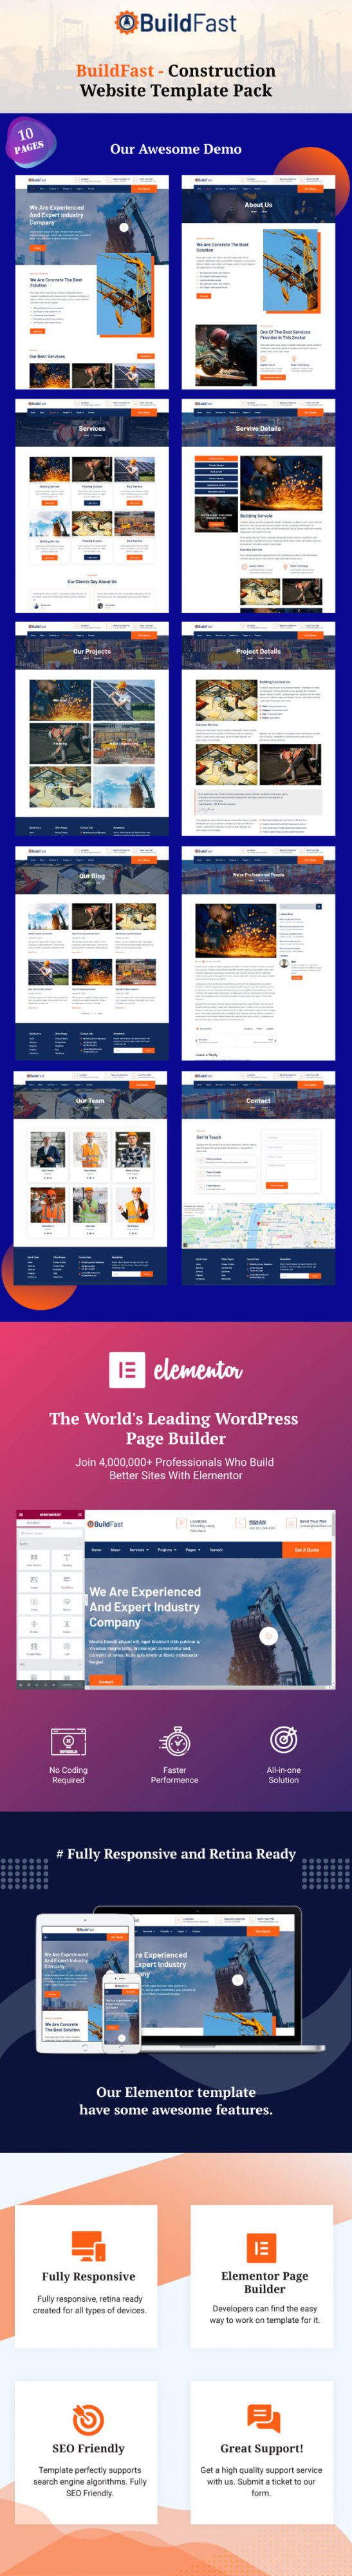 BuildFast-Construction-Website-Template-Pack